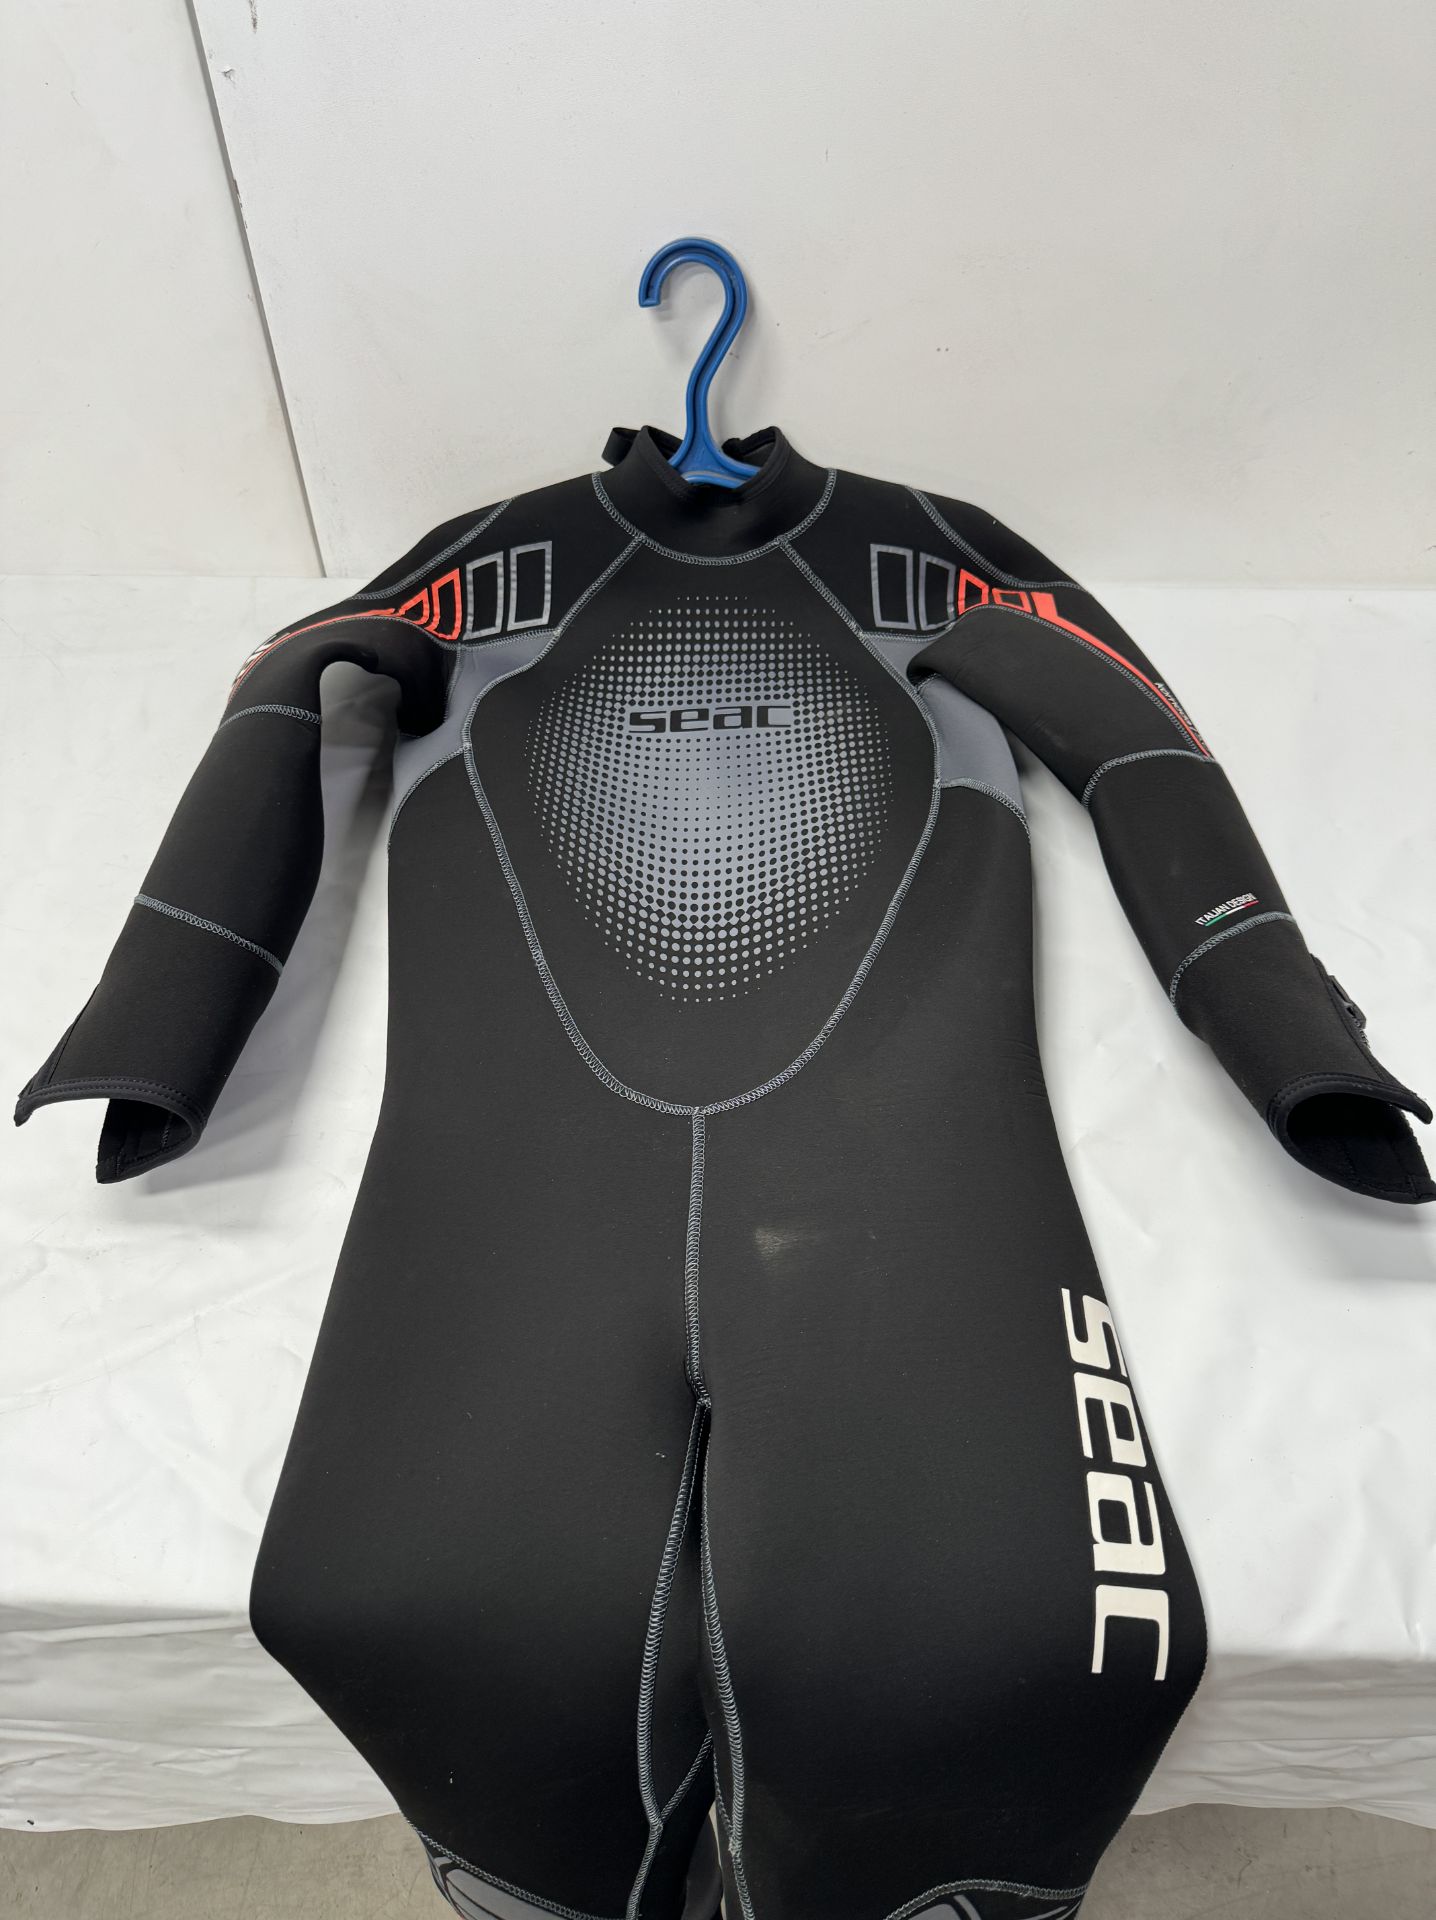 Six O’Neill, Beuchat, Seac Wetsuits (Location: Brentwood. Please Refer to General Notes) - Image 16 of 18